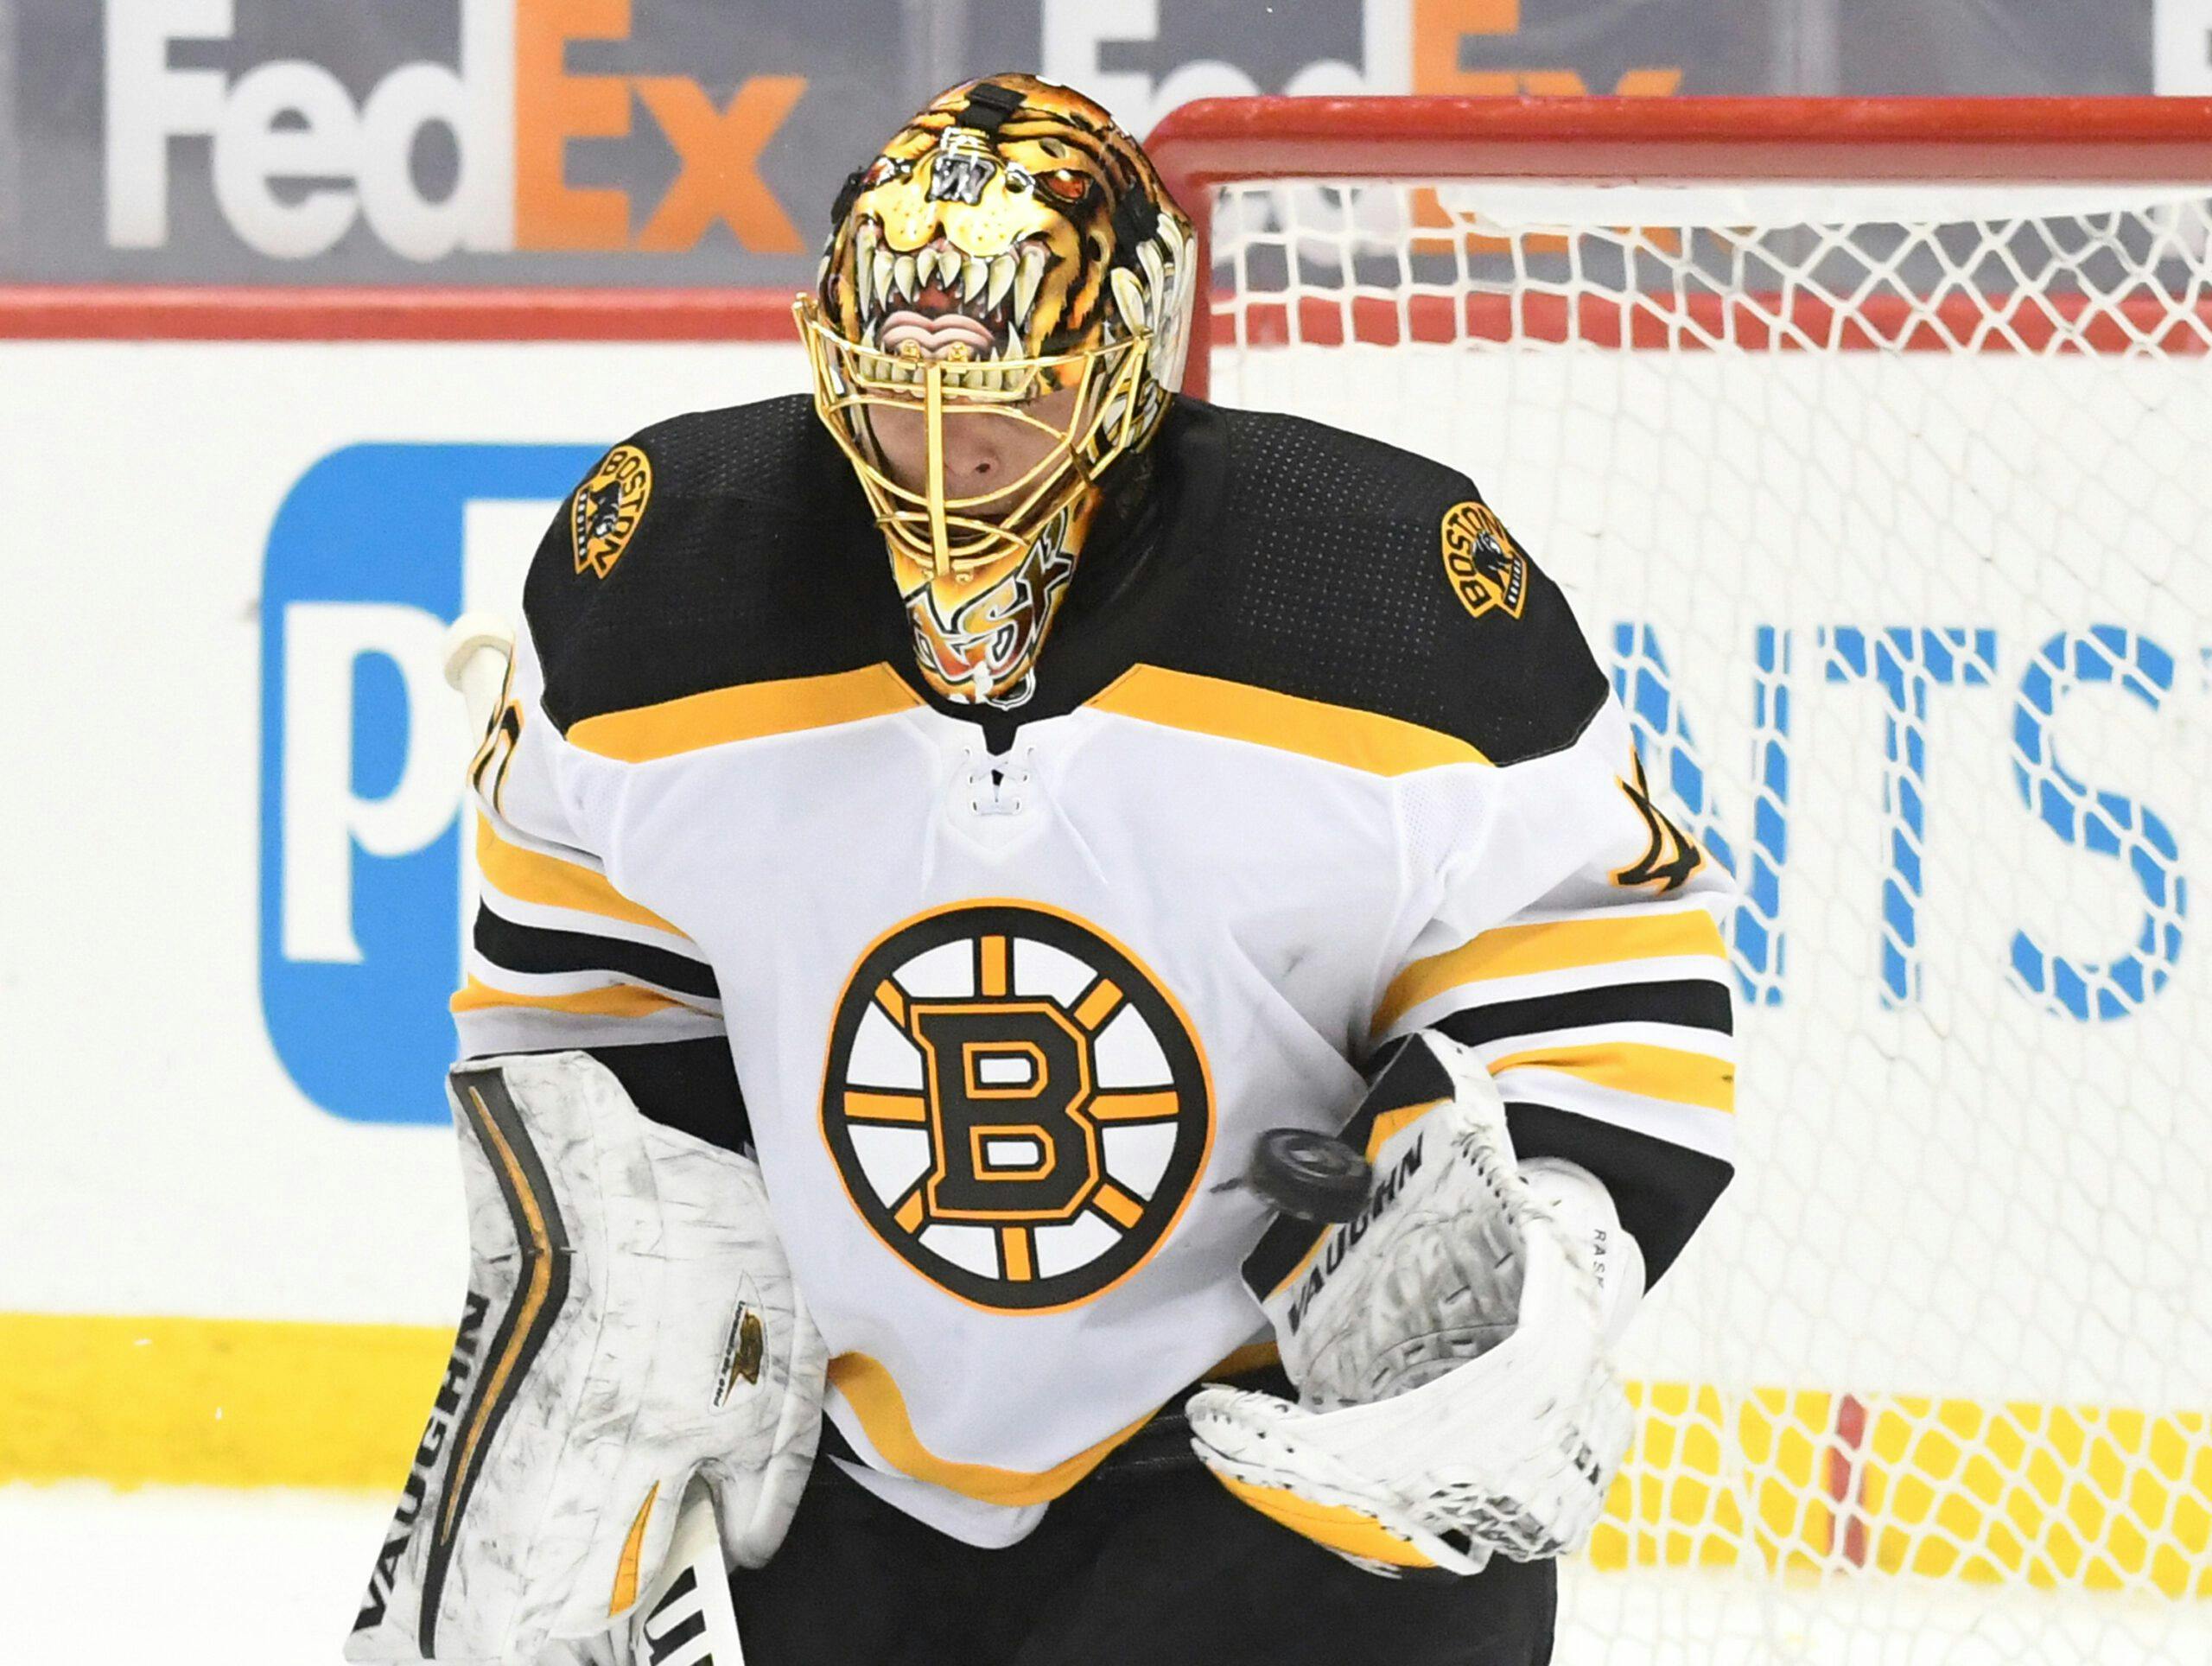 Tuukka Rask makes an appearance at Boston Bruins practice with Jeremy Swayman ill